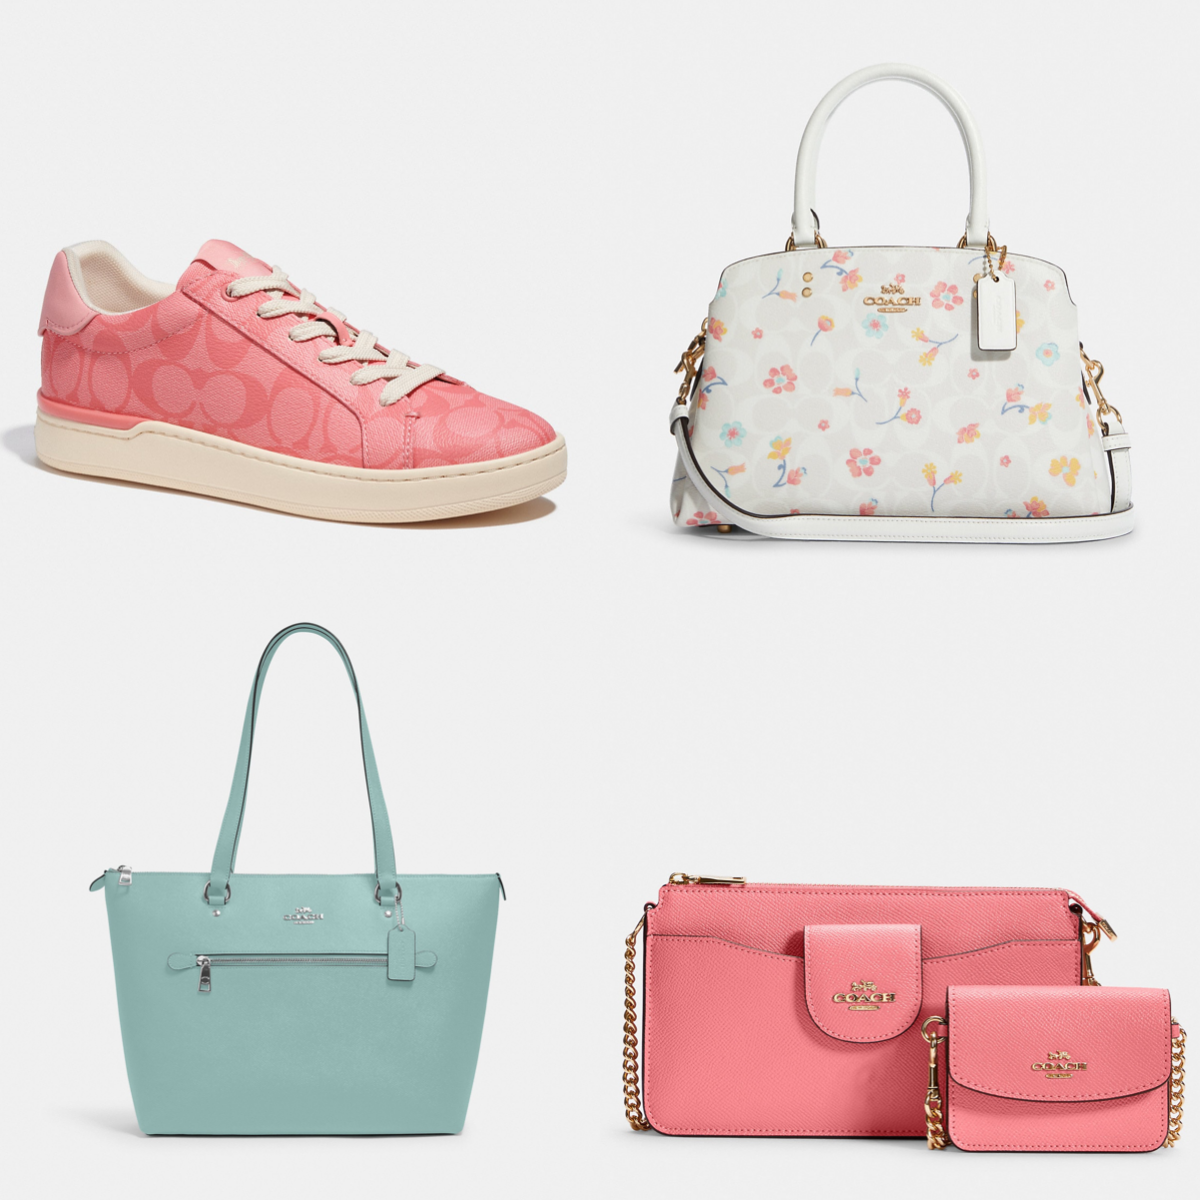 Chic purses, handbags on sale from Coach Outlet, Kate Spade, Tory